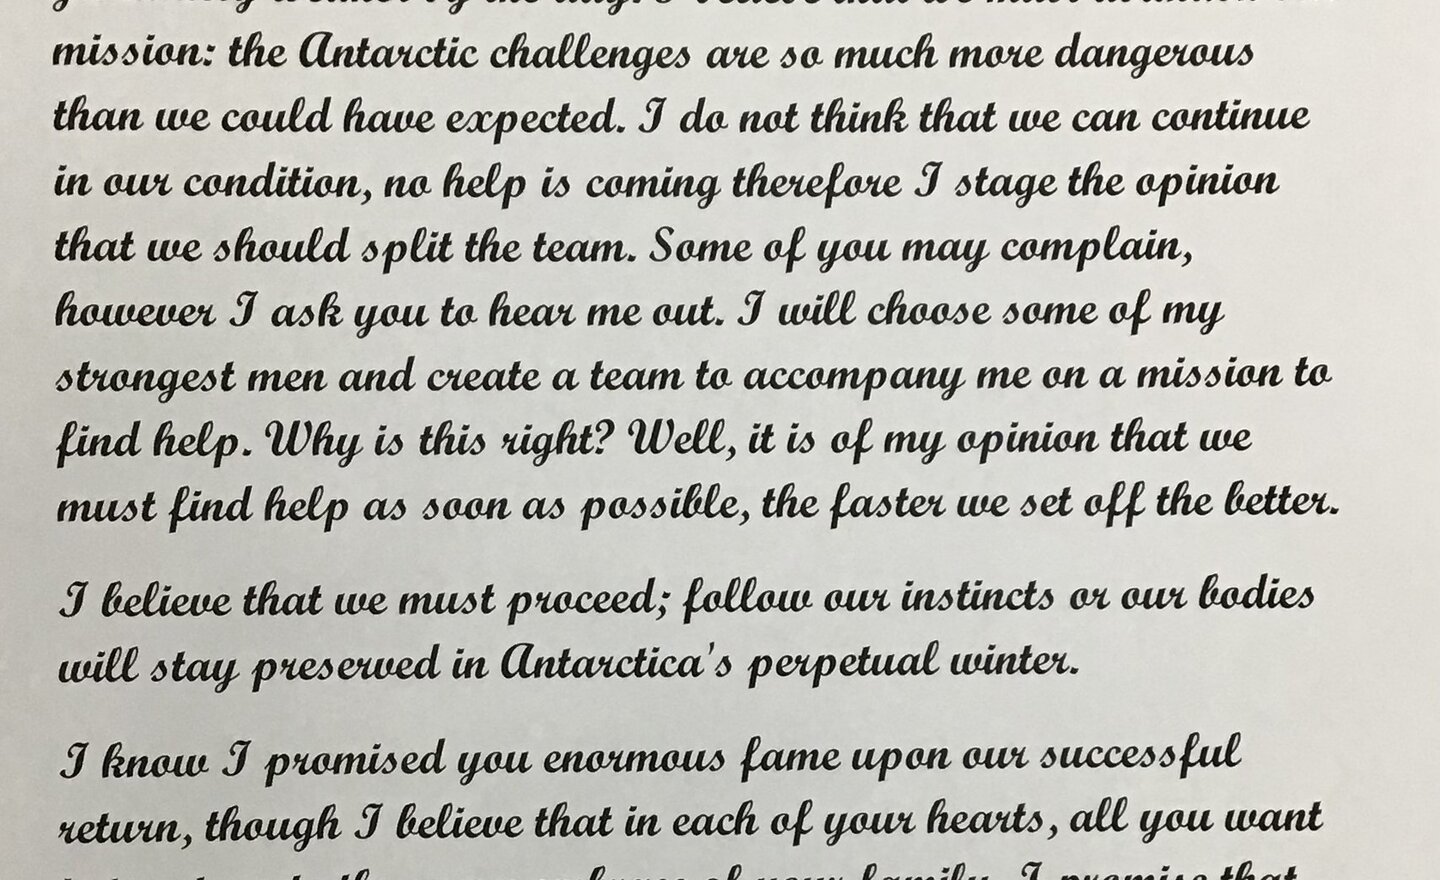 Image of Shackleton's letter to his crew